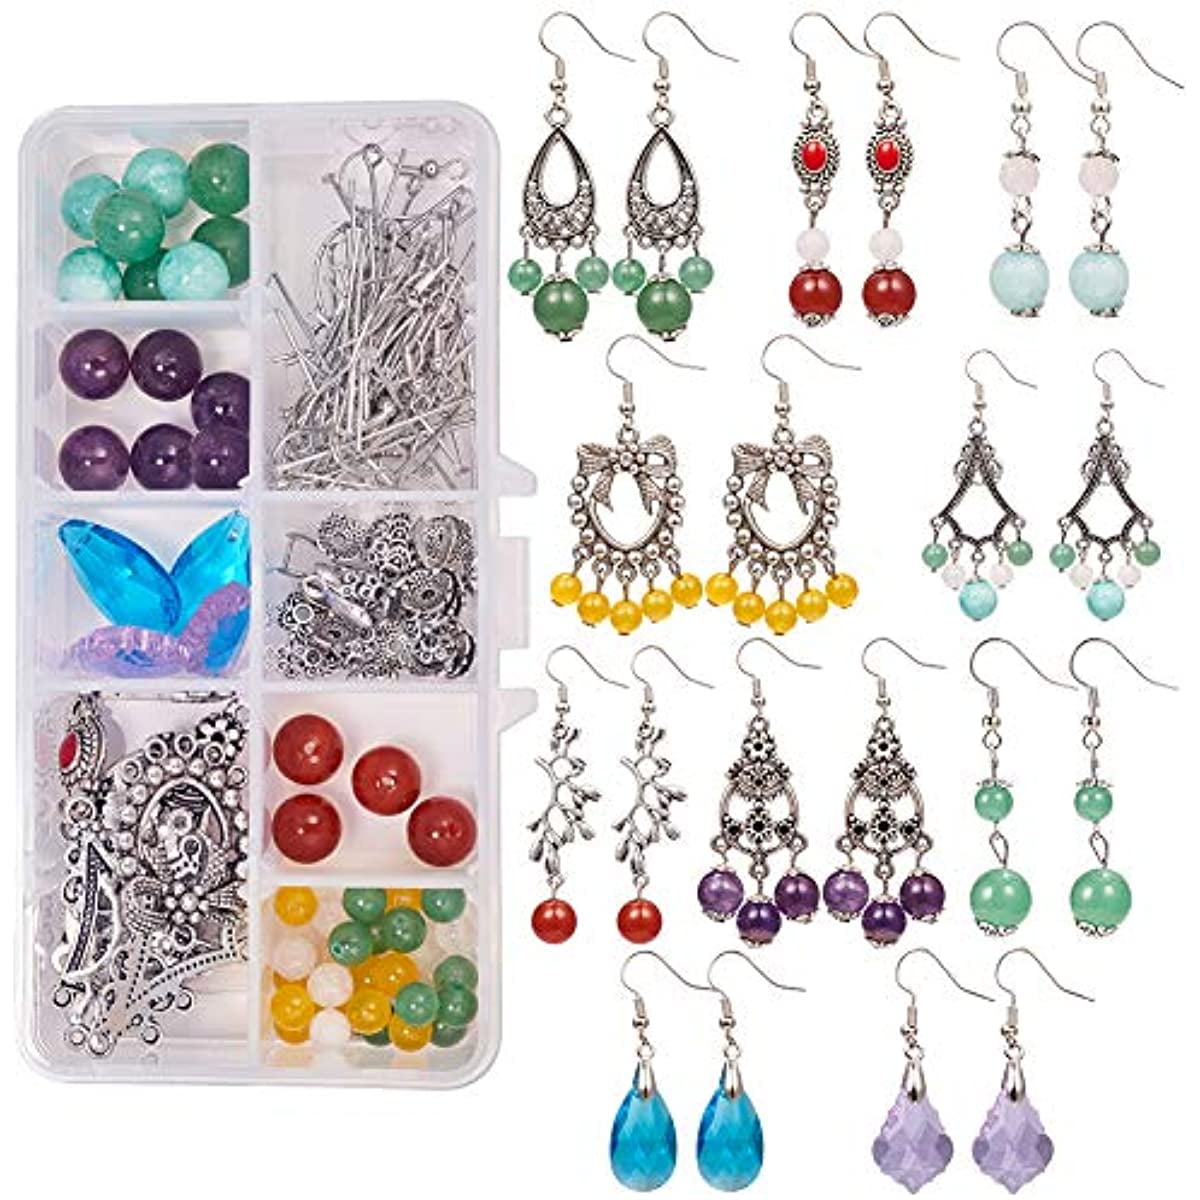 ZEENCIQ 40PCS Earring Making Kit, Earring Making Supplies, Earring Kit to  Make Earring for Jewelry Making and Crafting